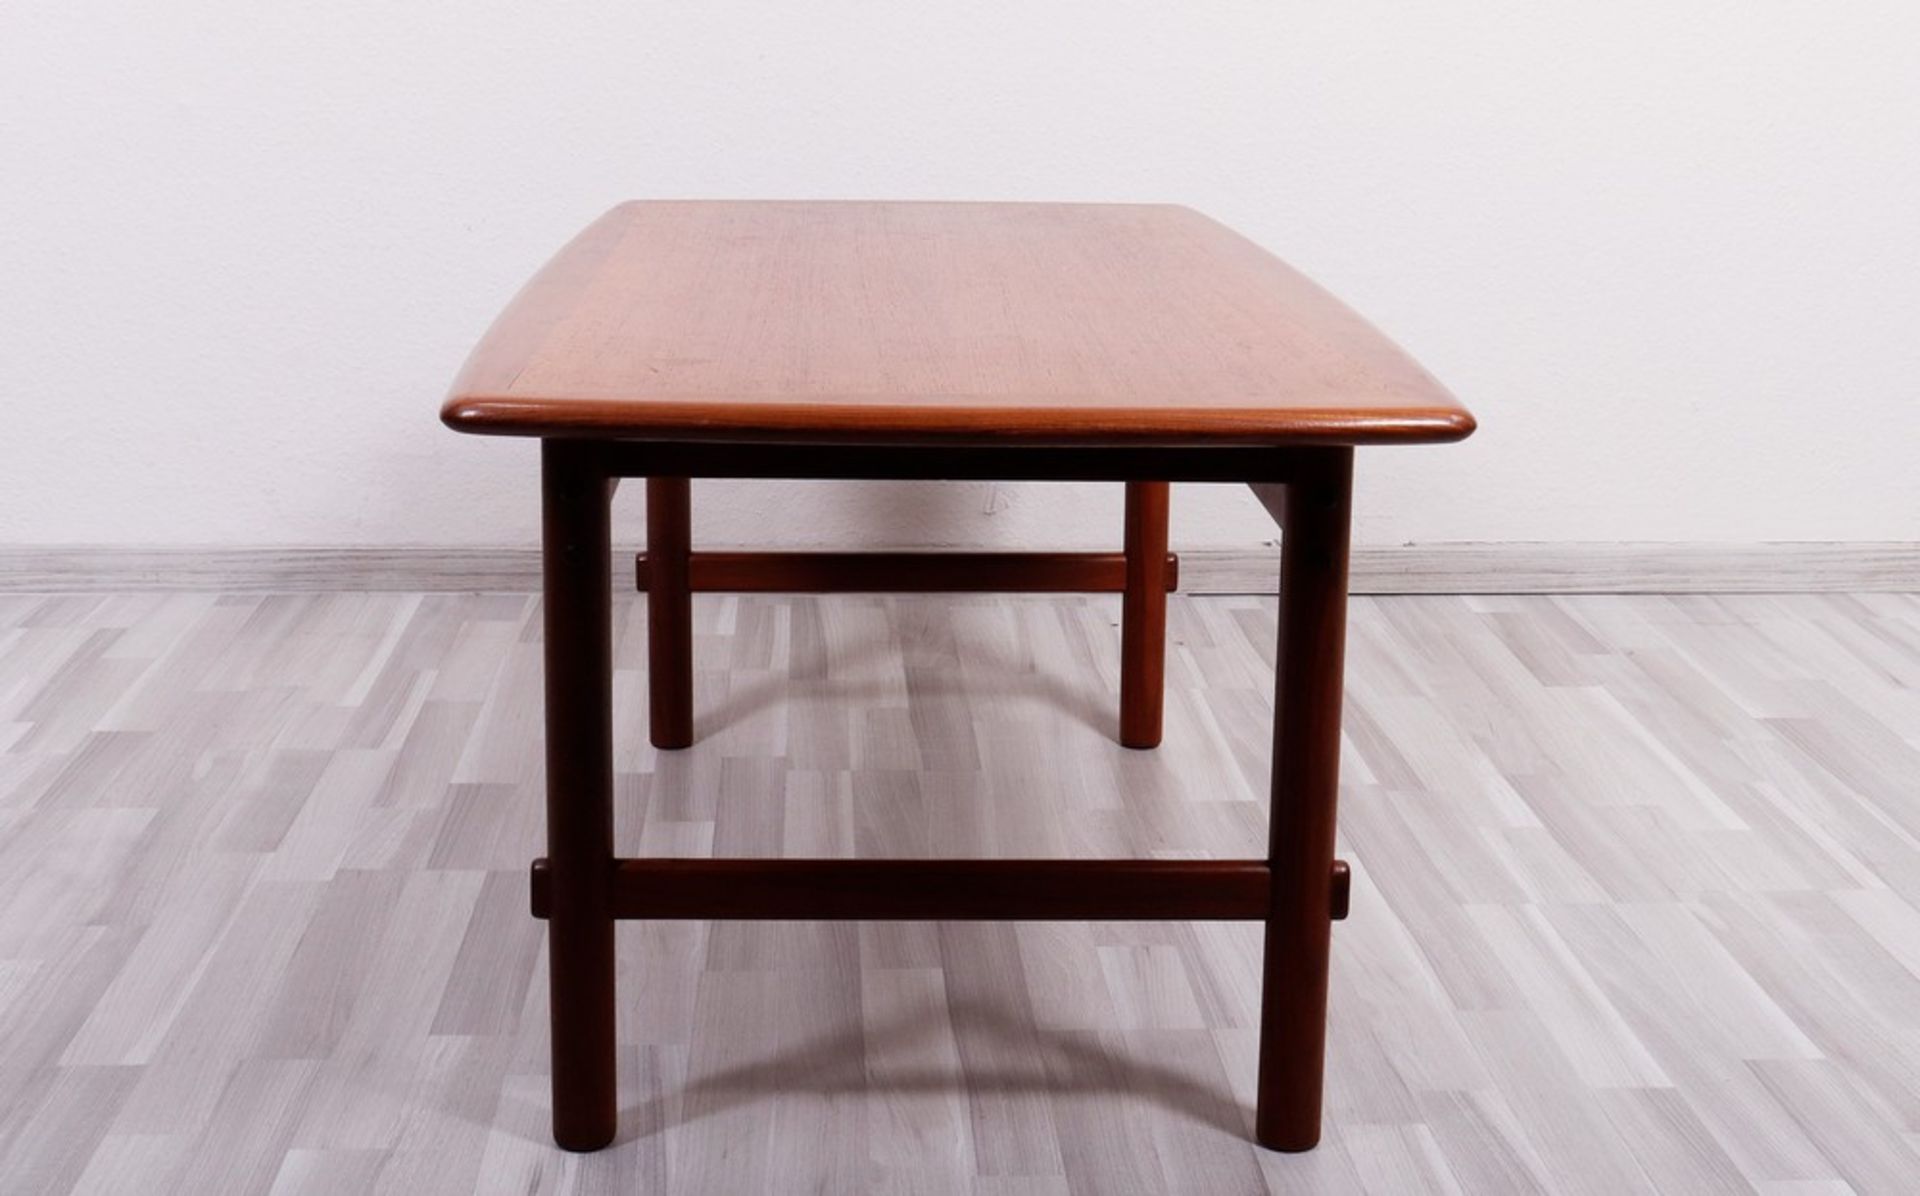 Sofa table, probably Denmark, 1960s - Image 3 of 3